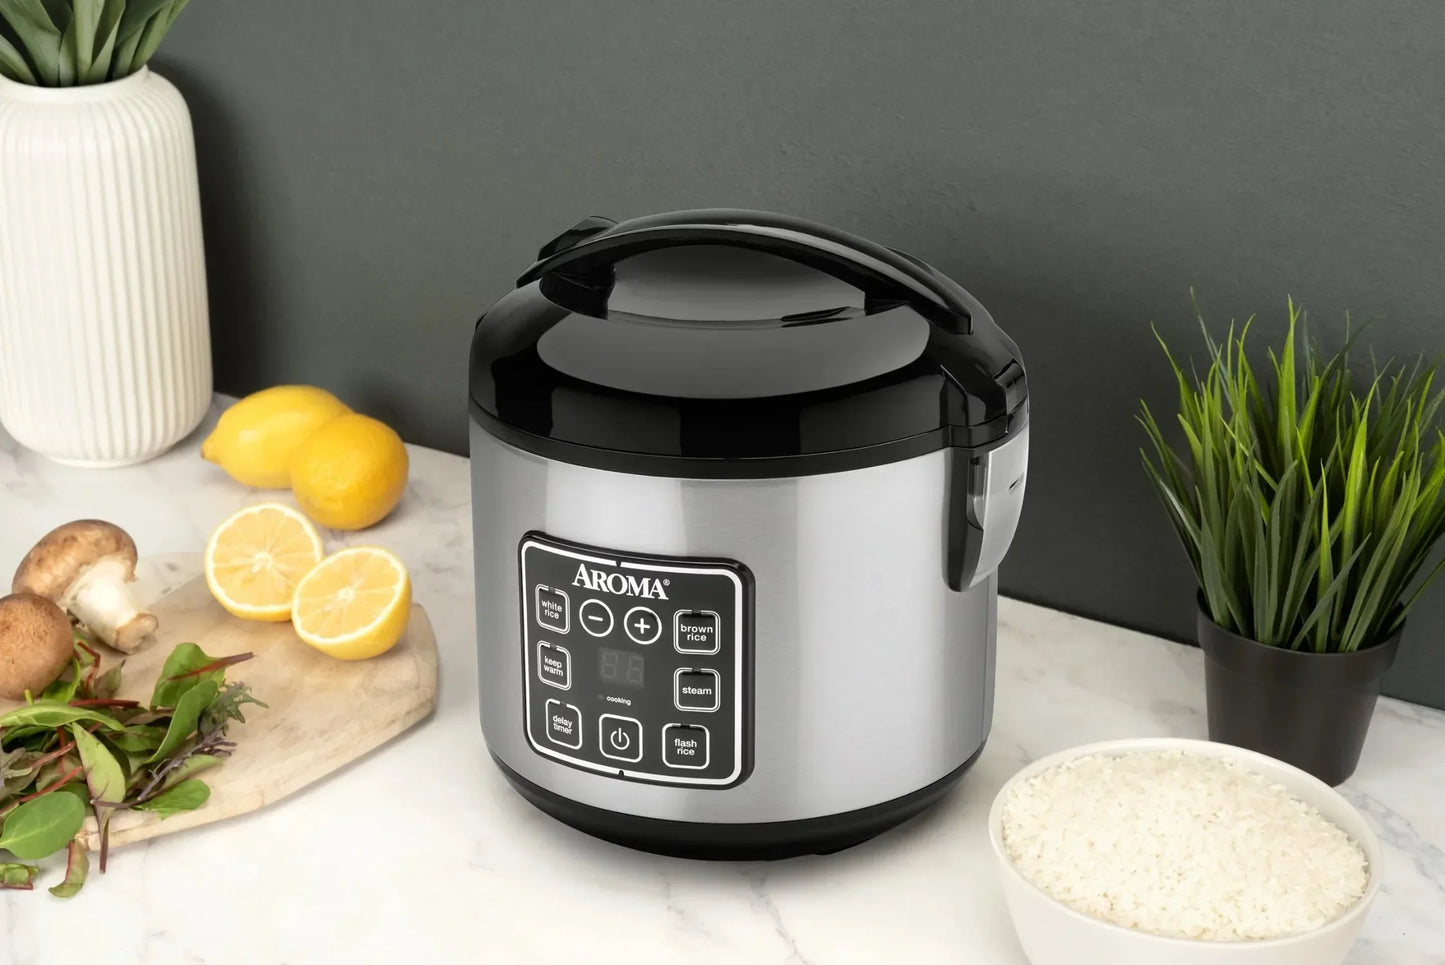 Rice Cooker, Steamed 8-Cup (Cooked) - Easier Life Emporium